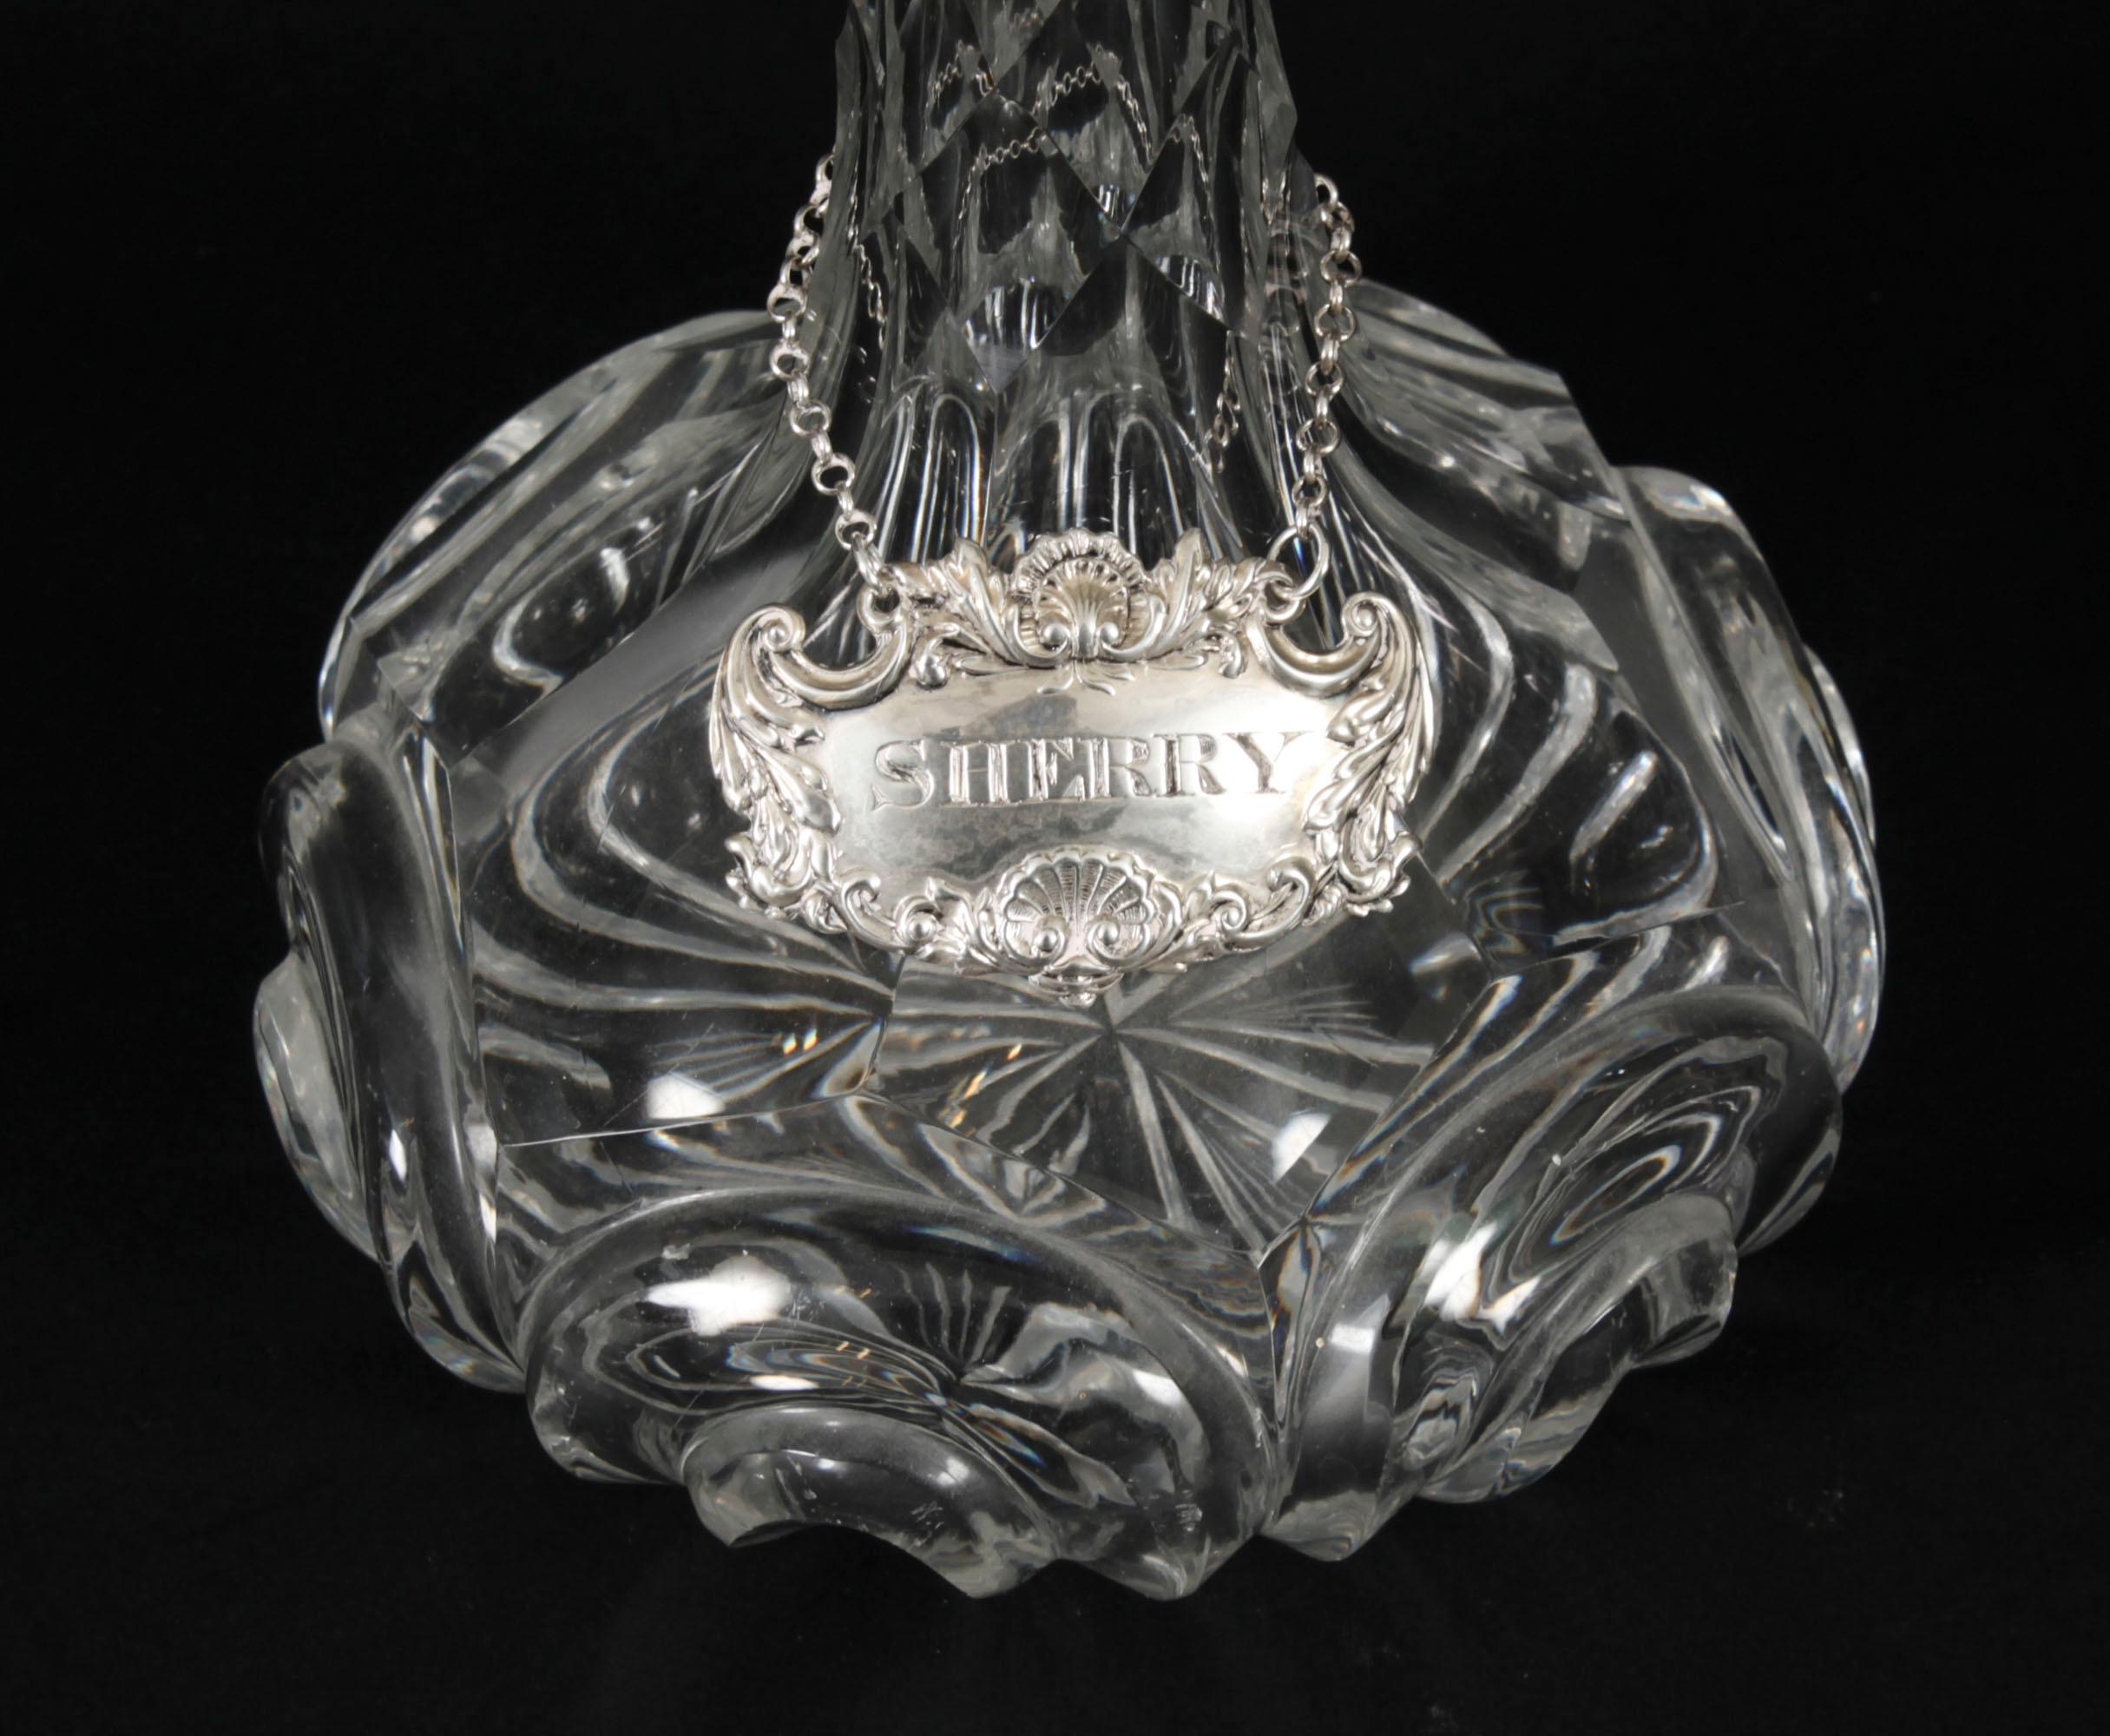 Early 20th Century Antique Cut Glass Ship's Sherry Decanter with Silver Label Circa 1920 For Sale